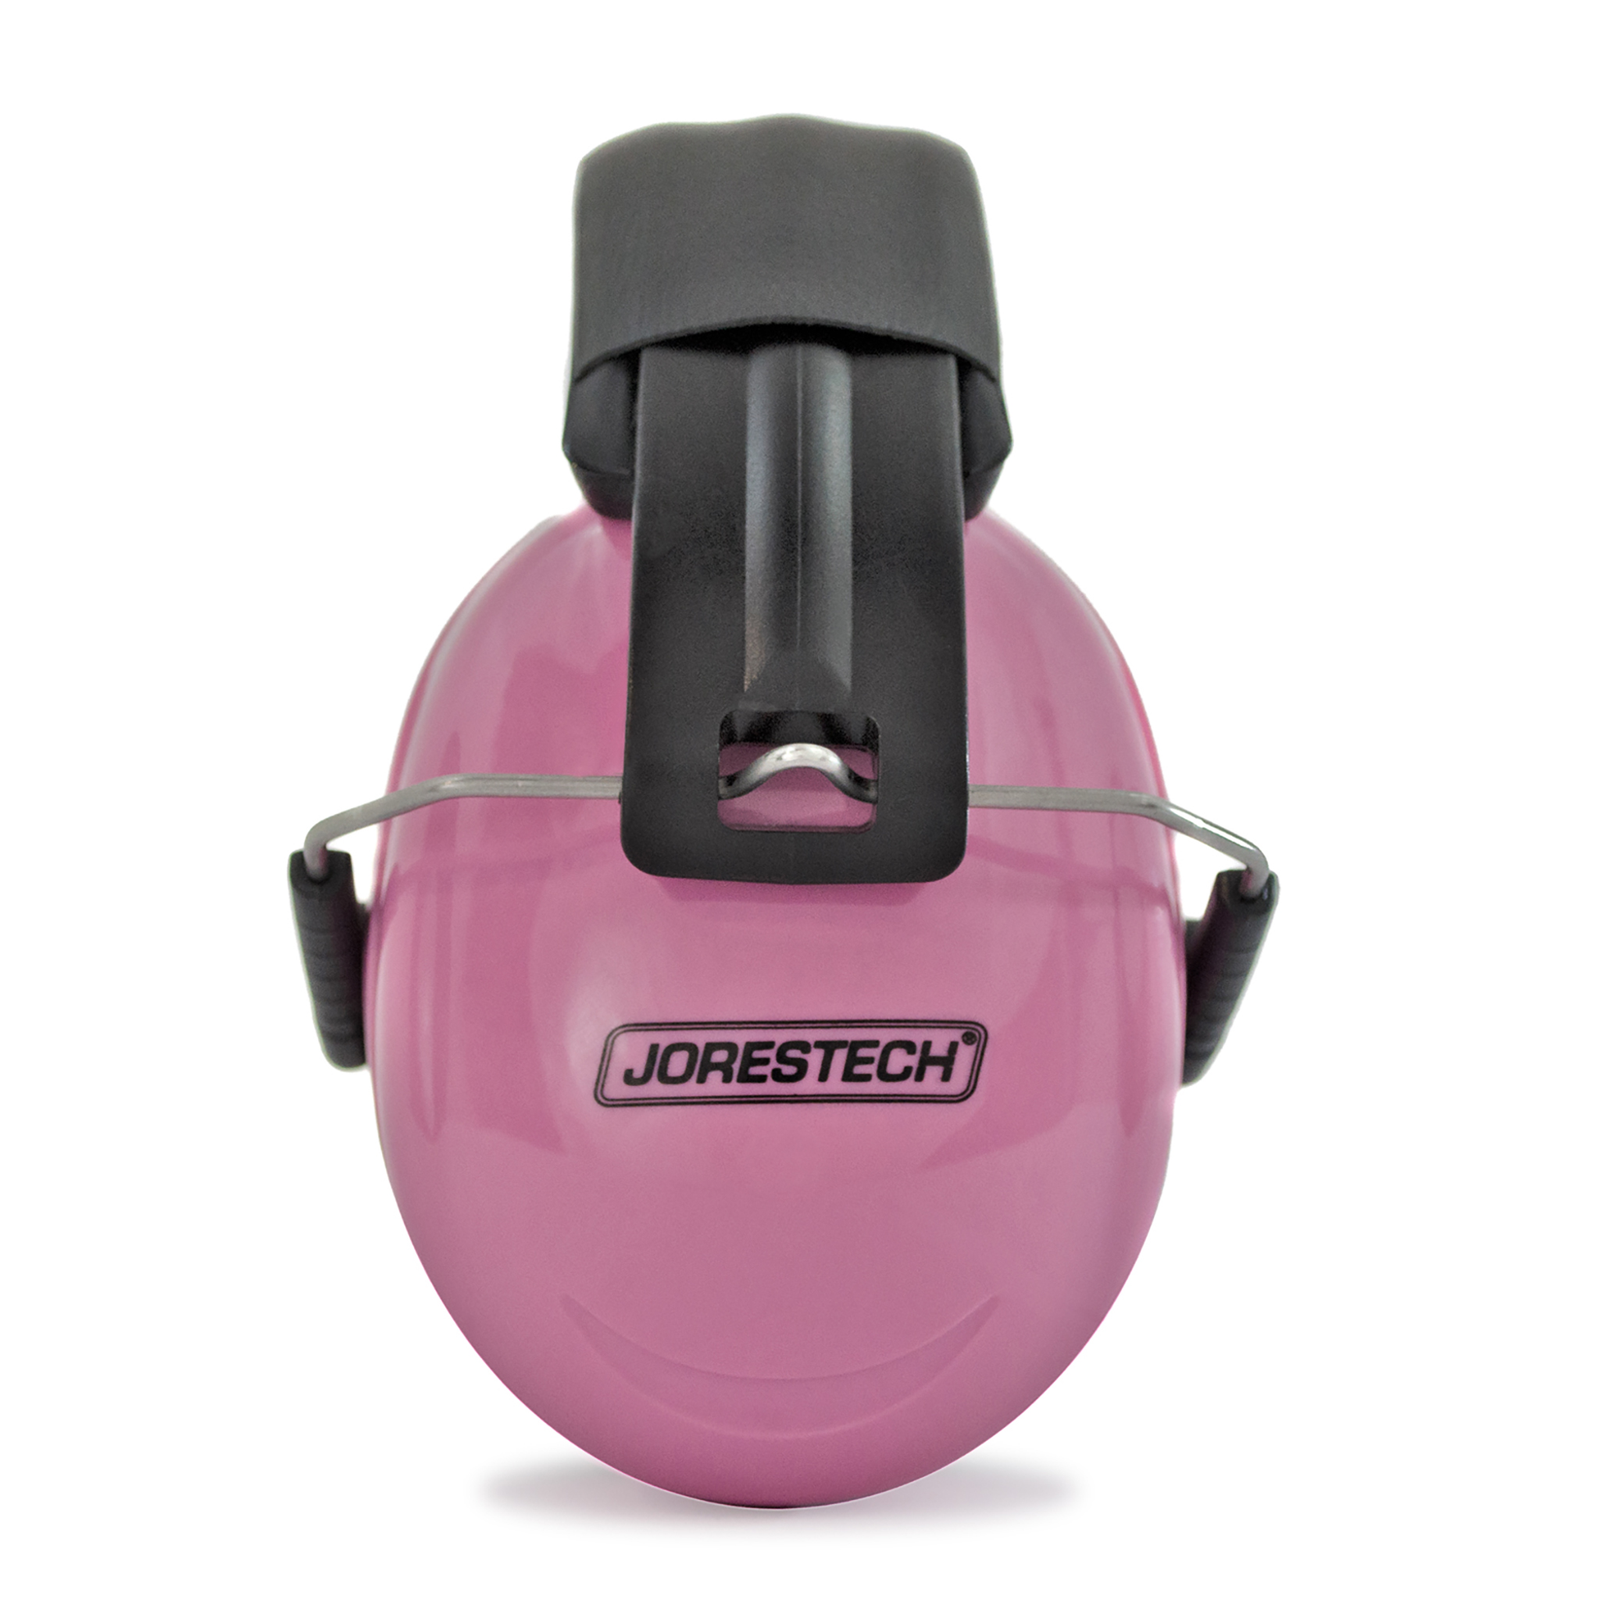 Side view of the 27DB NRR noise cancelling JORESTECH pink earmuff